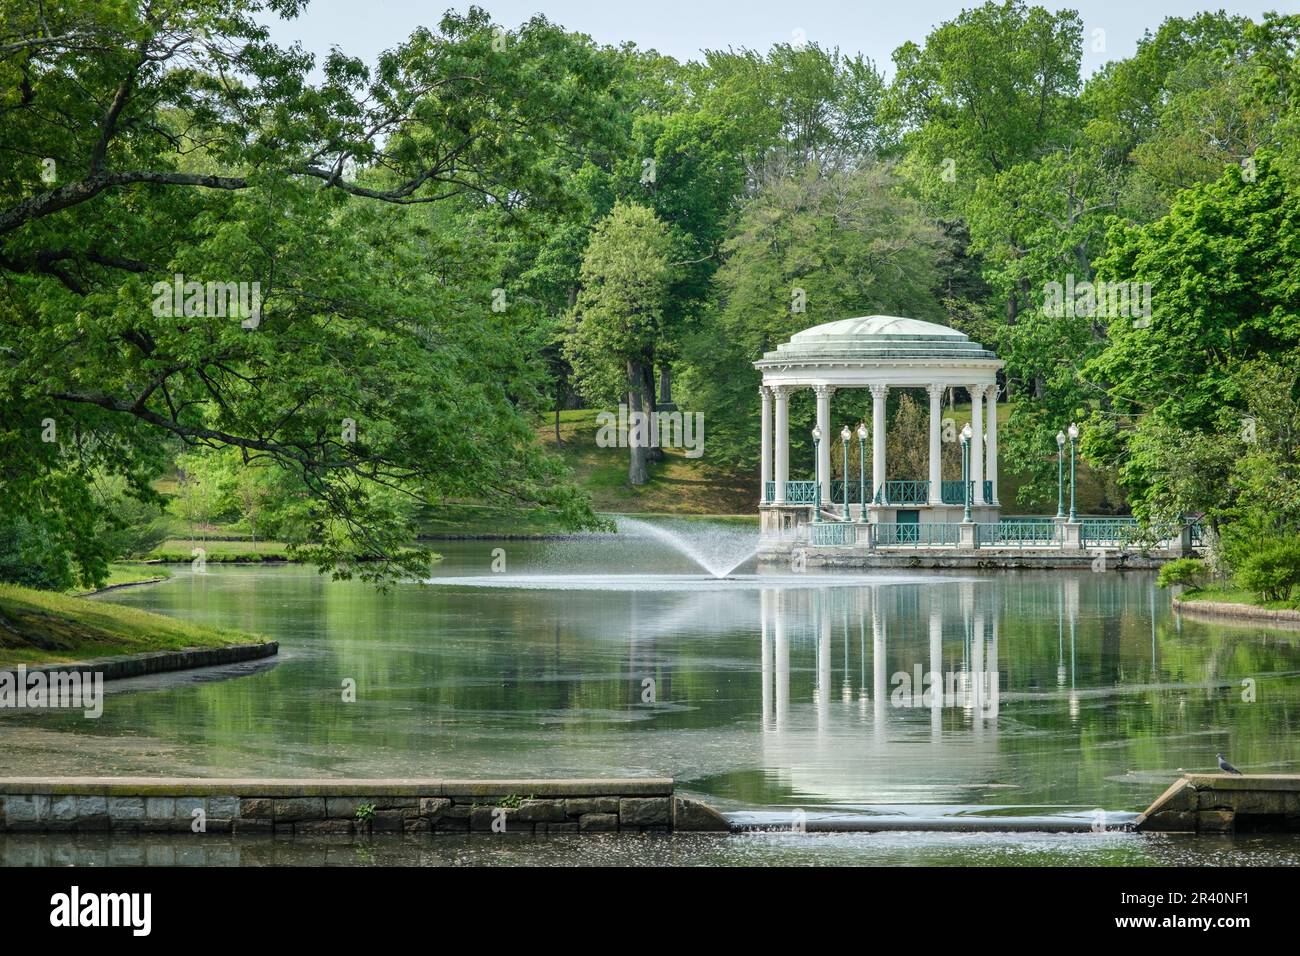 Roger Williams Park Roosevelt Lake bandstand and fountain in Providence Rhode Island, USA Stock Photo